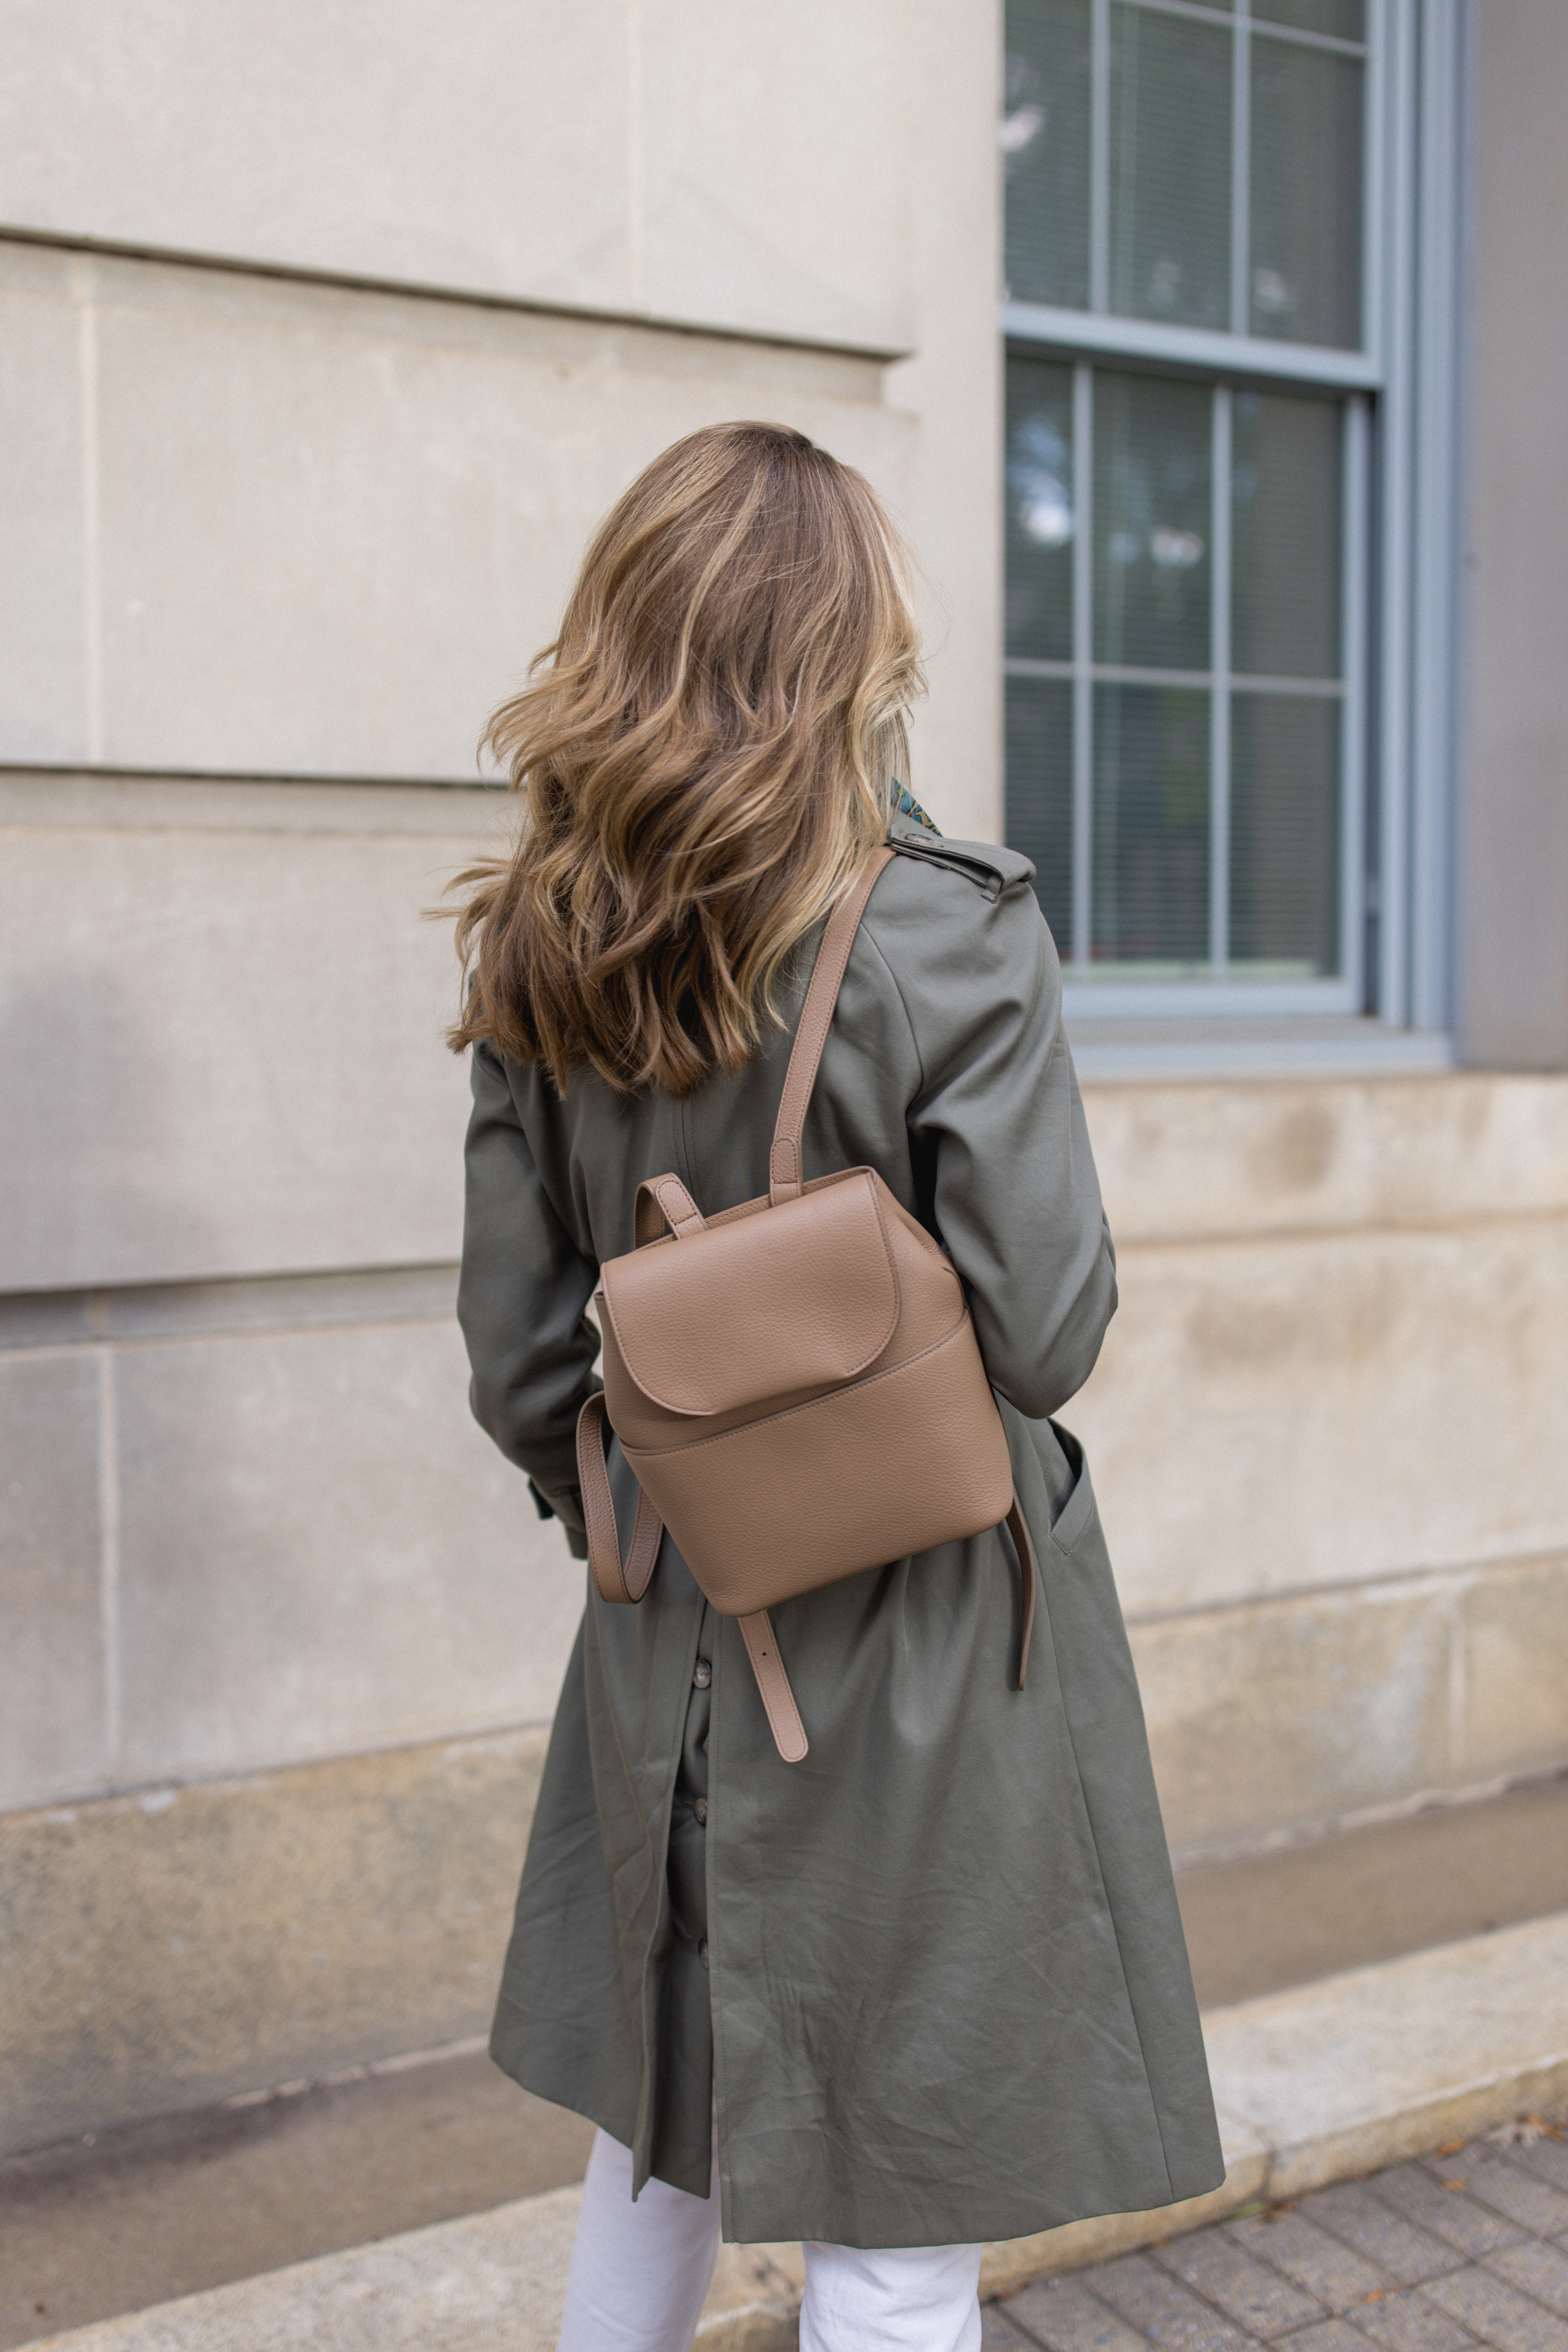 Cuyana - Designed for those quick errands and outings, our newest